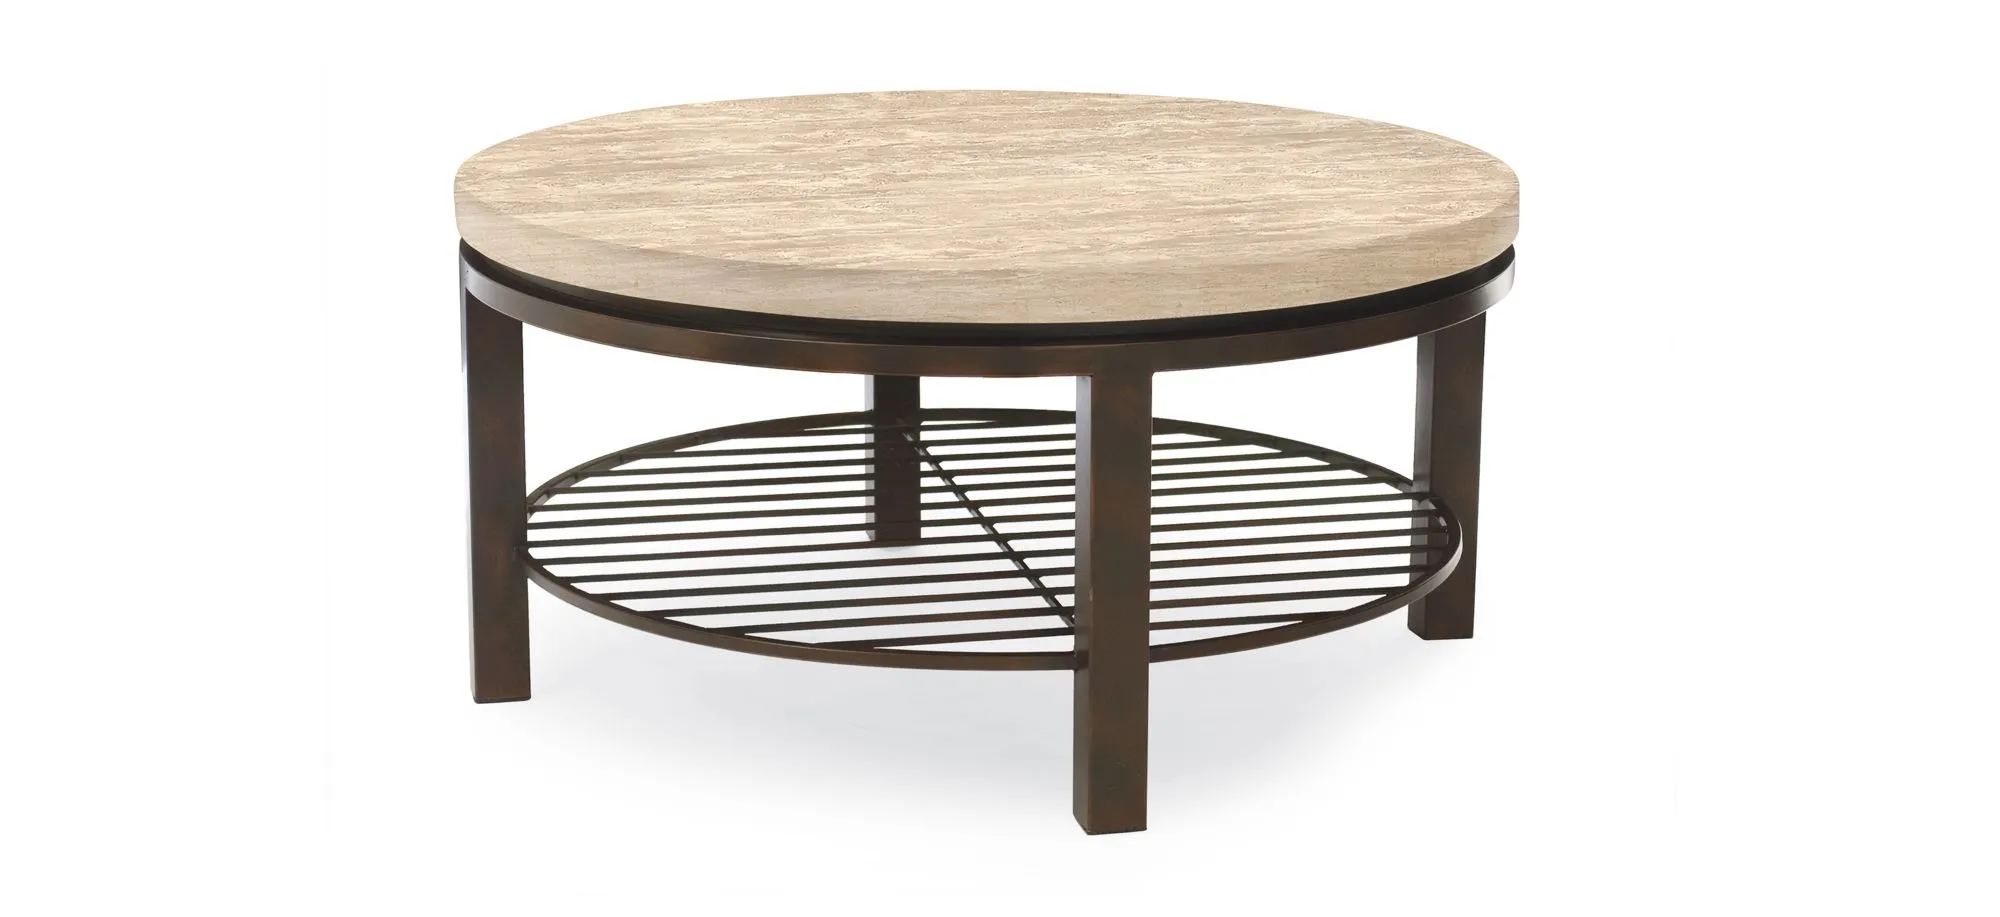 Tempo Round Coffee Table in Stone by Bernhardt